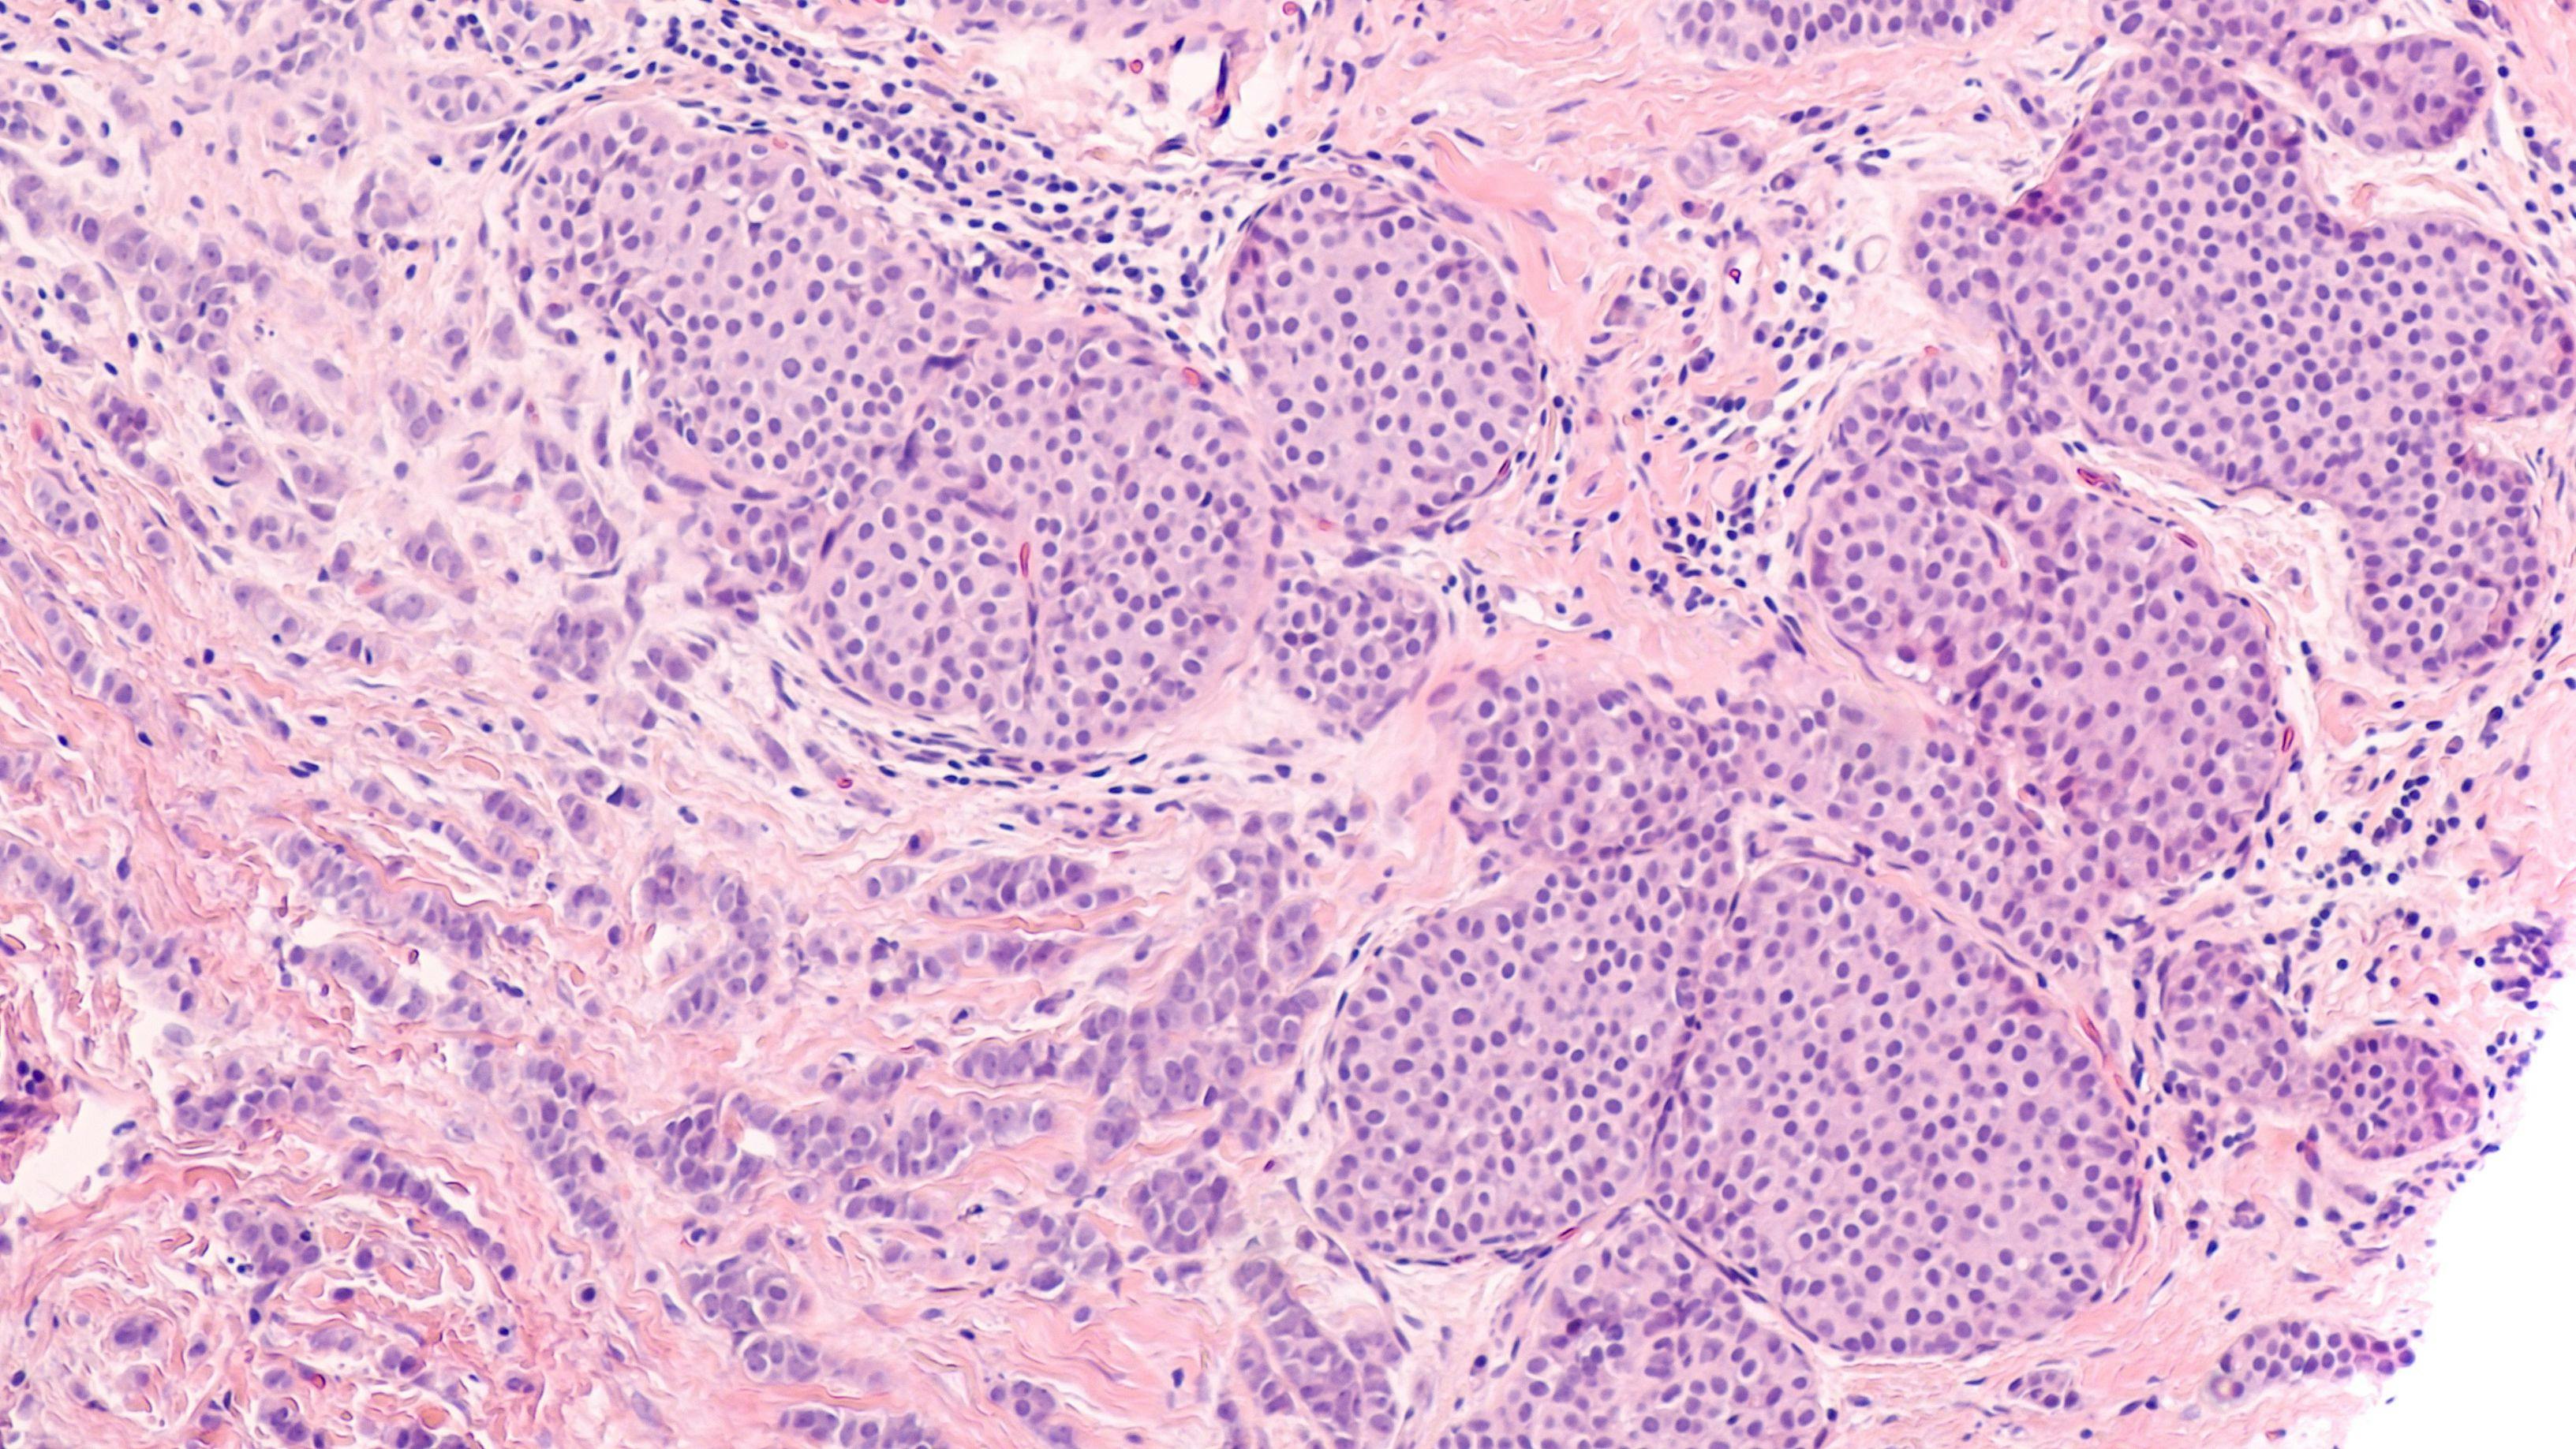 Breast cancer histology: Lobular carcinoma in situ (LCIS) is seen in the lower left with invasive (infiltrating) lobular carcinoma in the upper right. Screening mammography can detect early tumors. | Image Credit: © David A. Litman - www.stock.adobe.com